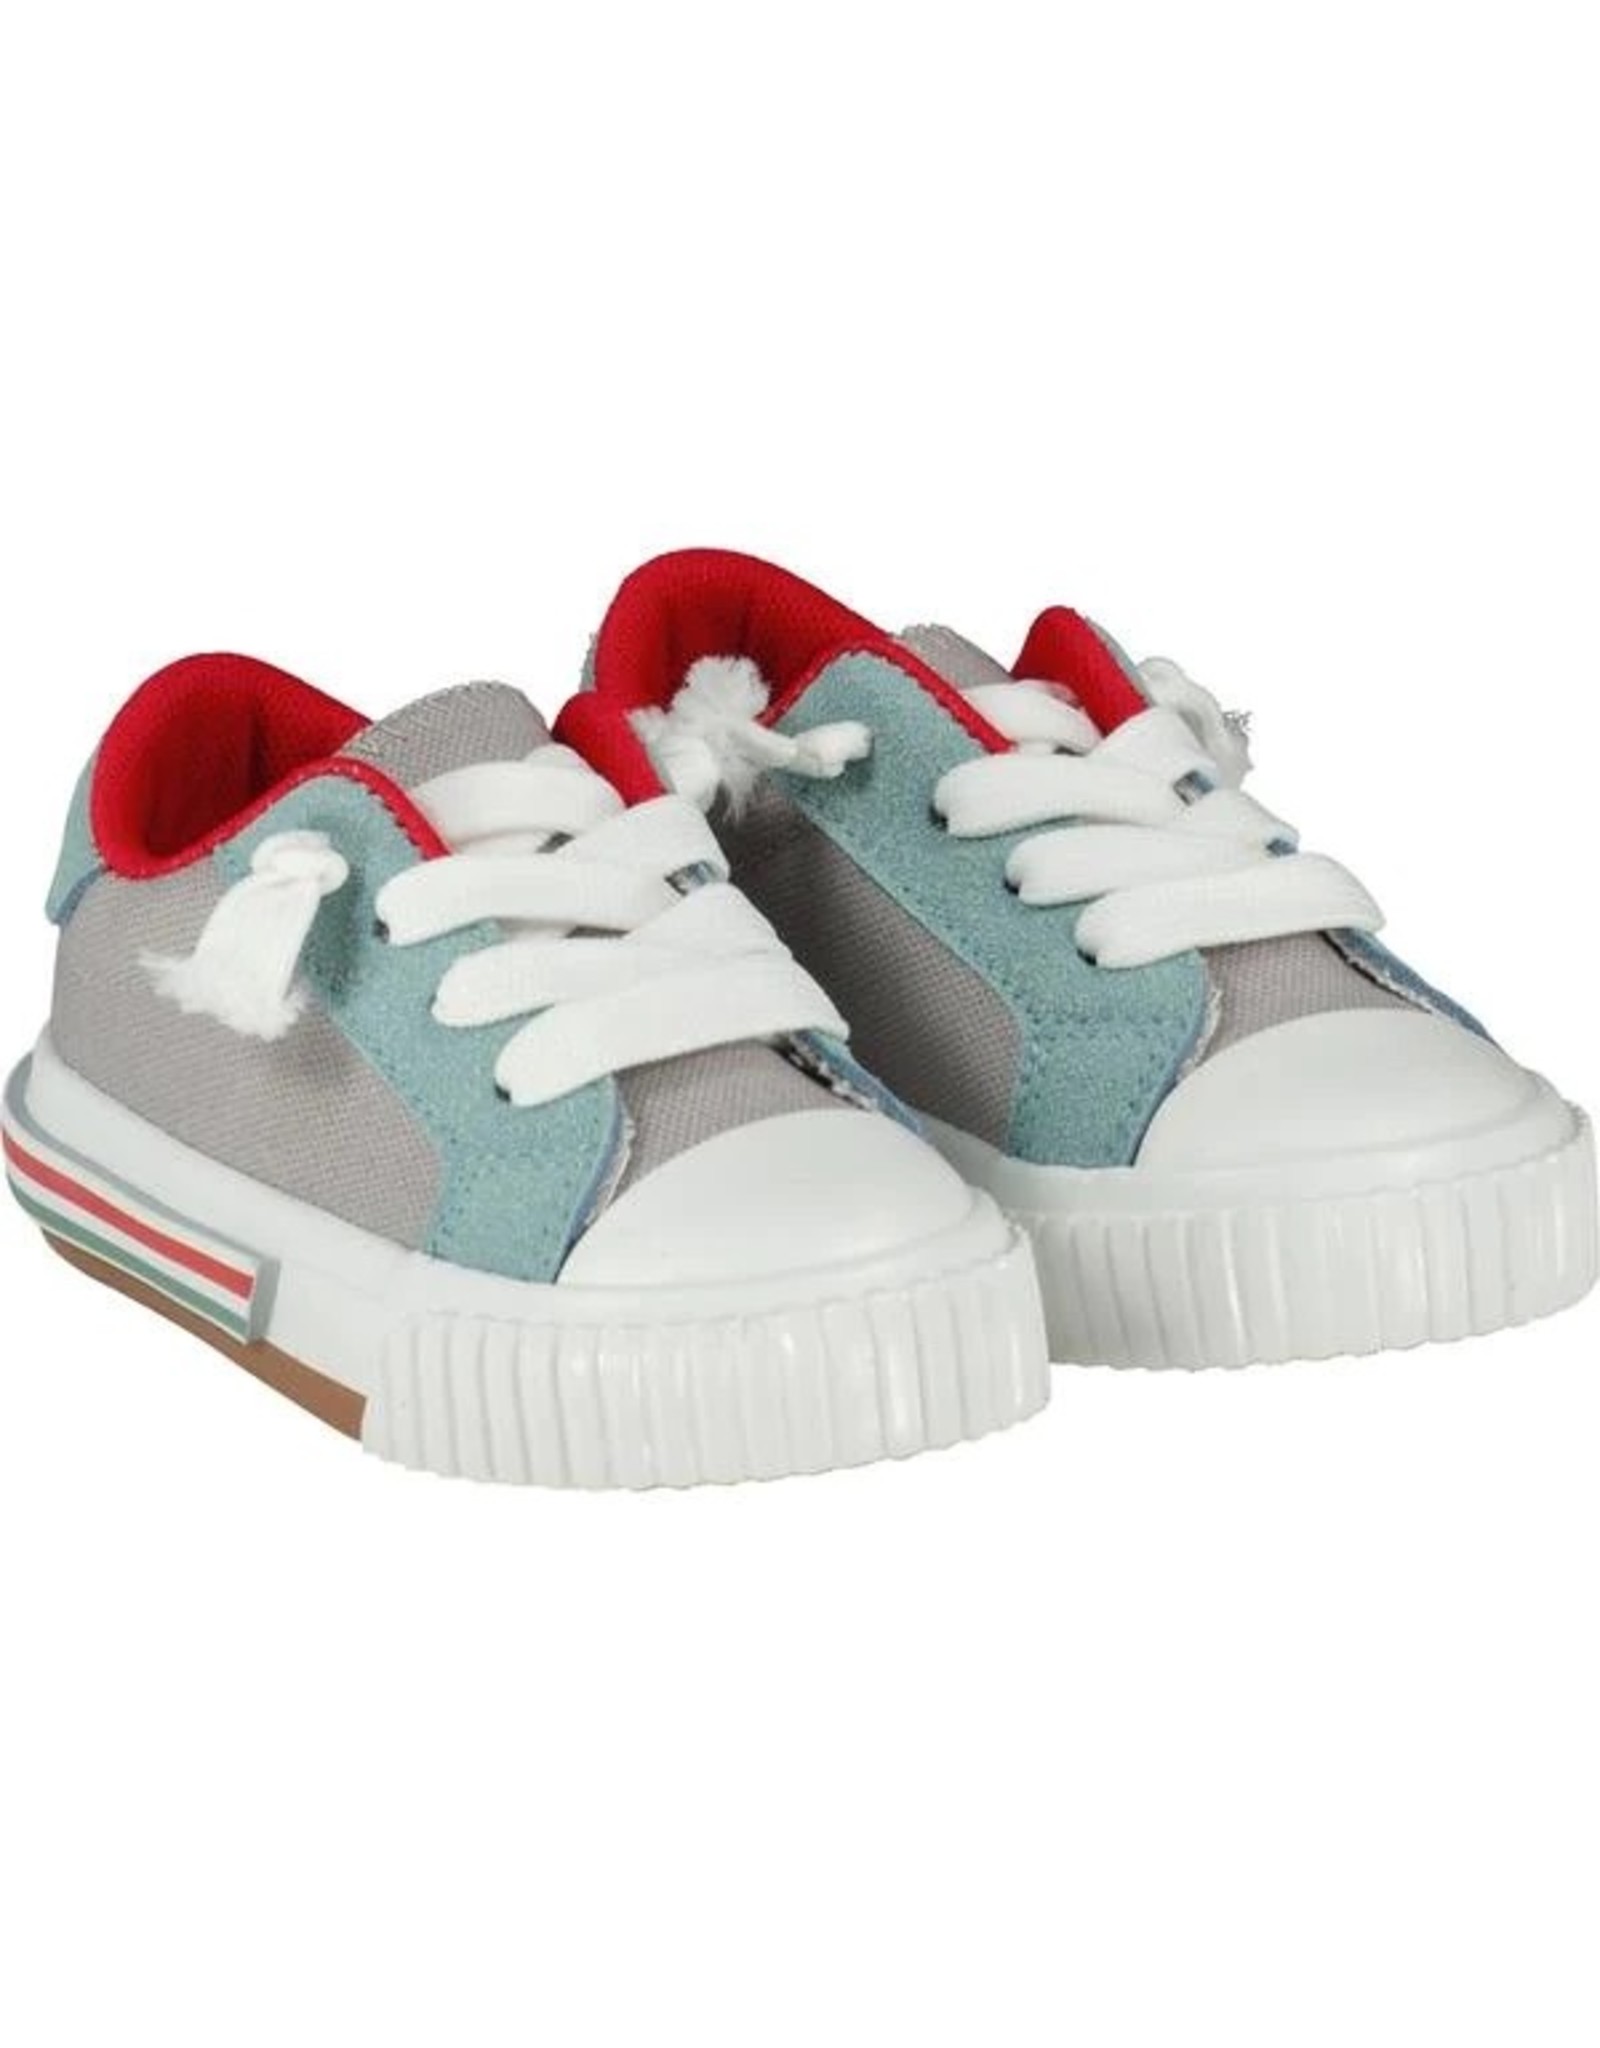 Me & Henry Harbour Canvas Sneakers-Grey Multi